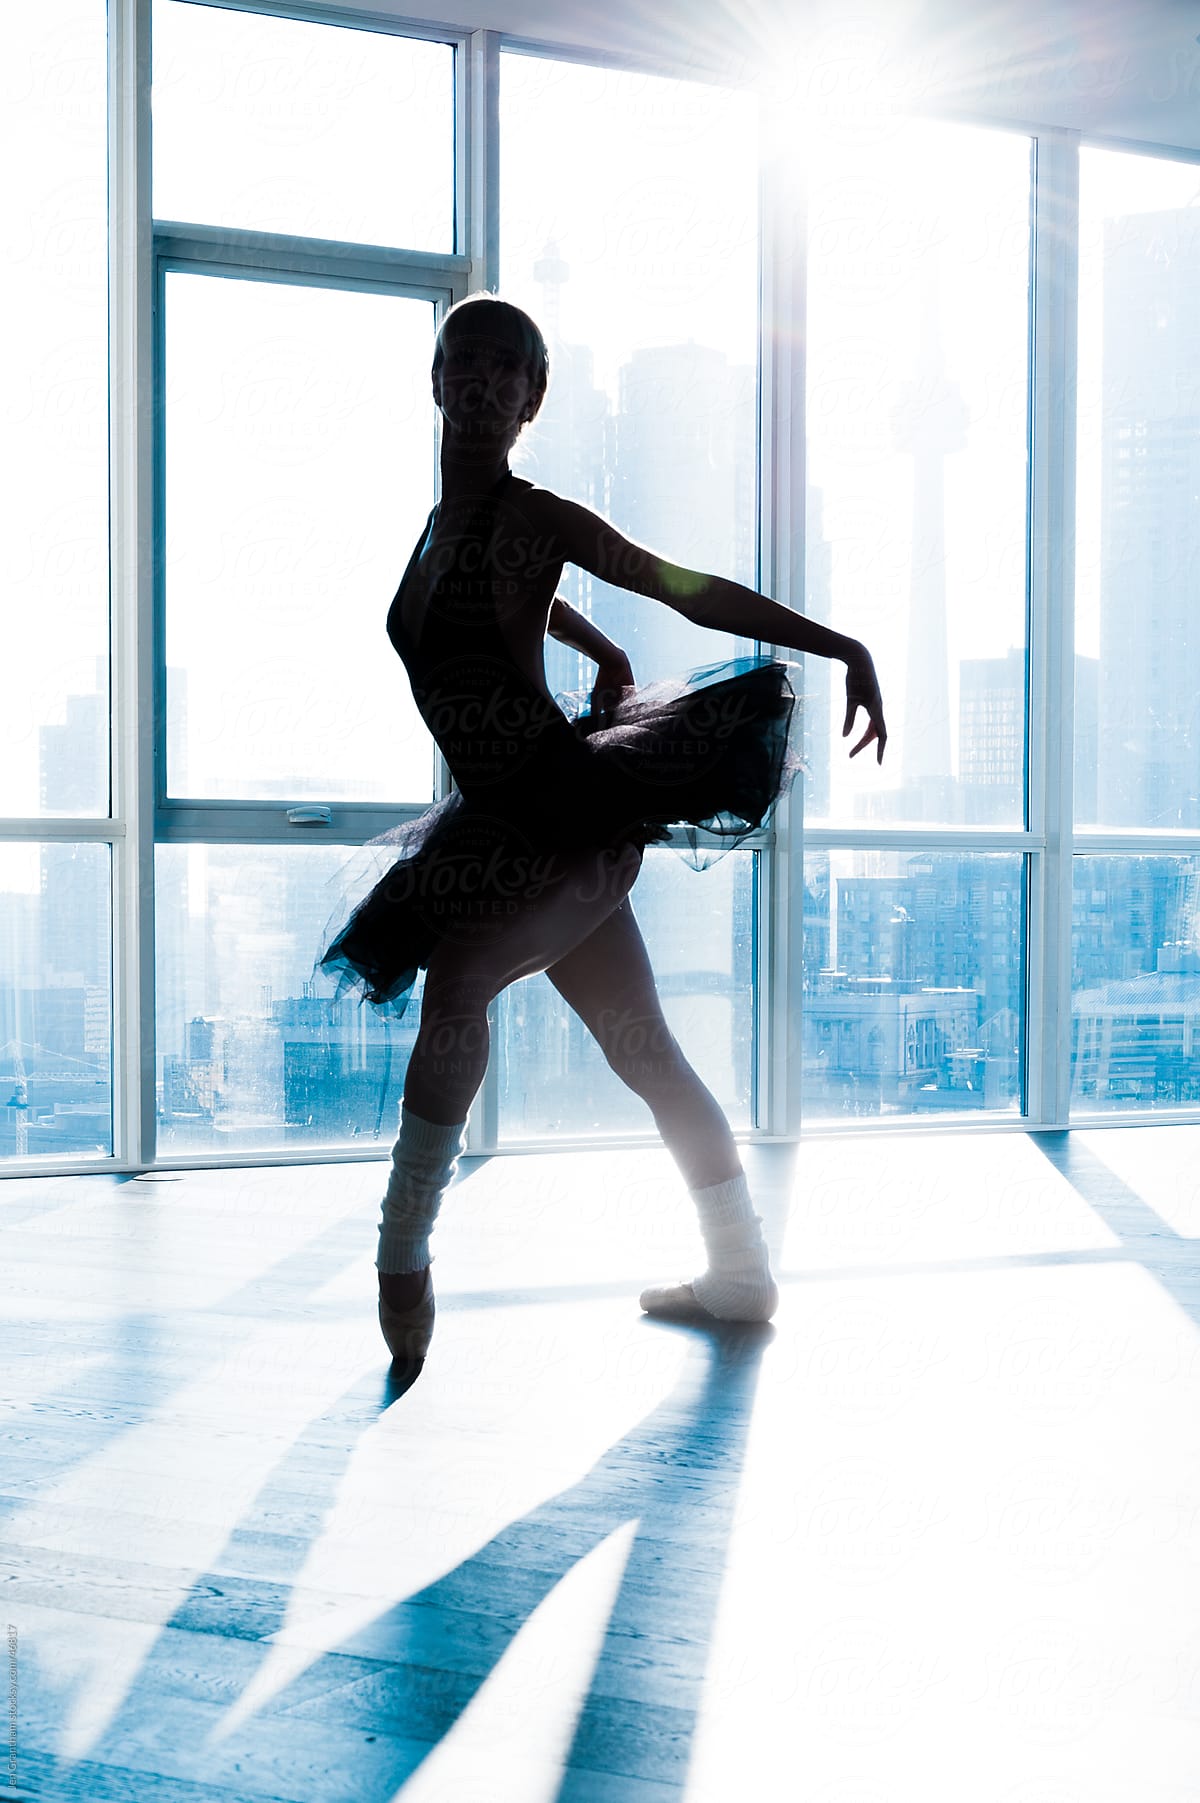 Ballerina in silhouette in front of a window